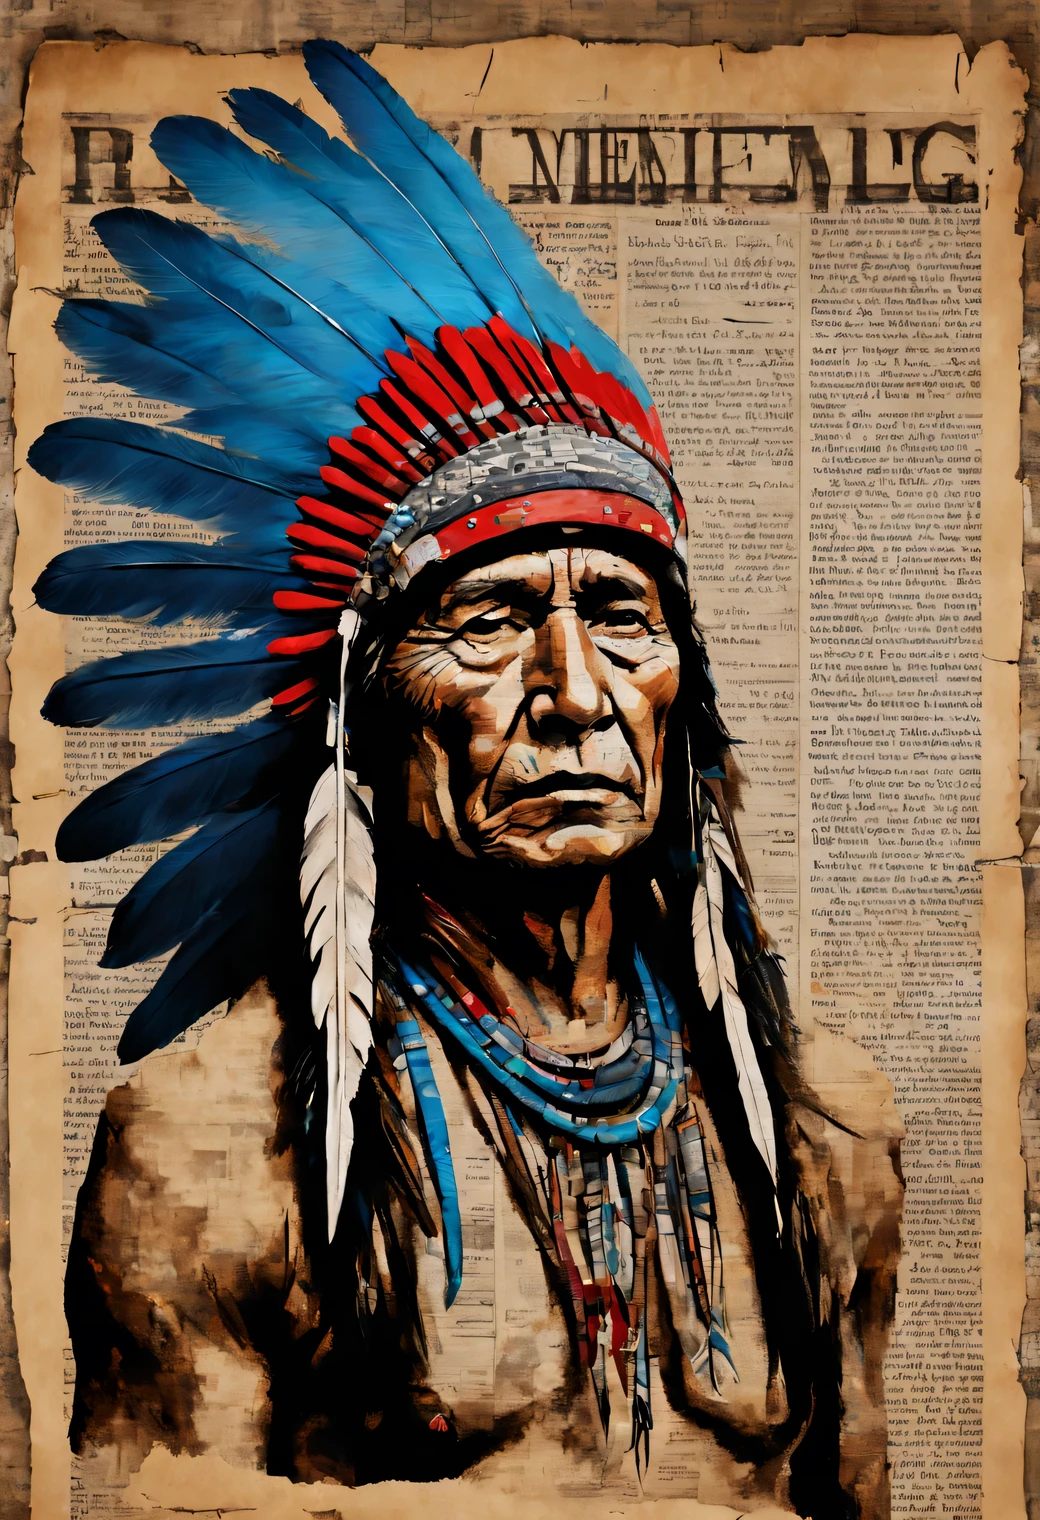 The art of drawing on newspaper., acrylic drawing on an old newspaper, portrait of a red Native American man wearing a headdress with blue feathers drawn on top of an old newspaper, a high resolution